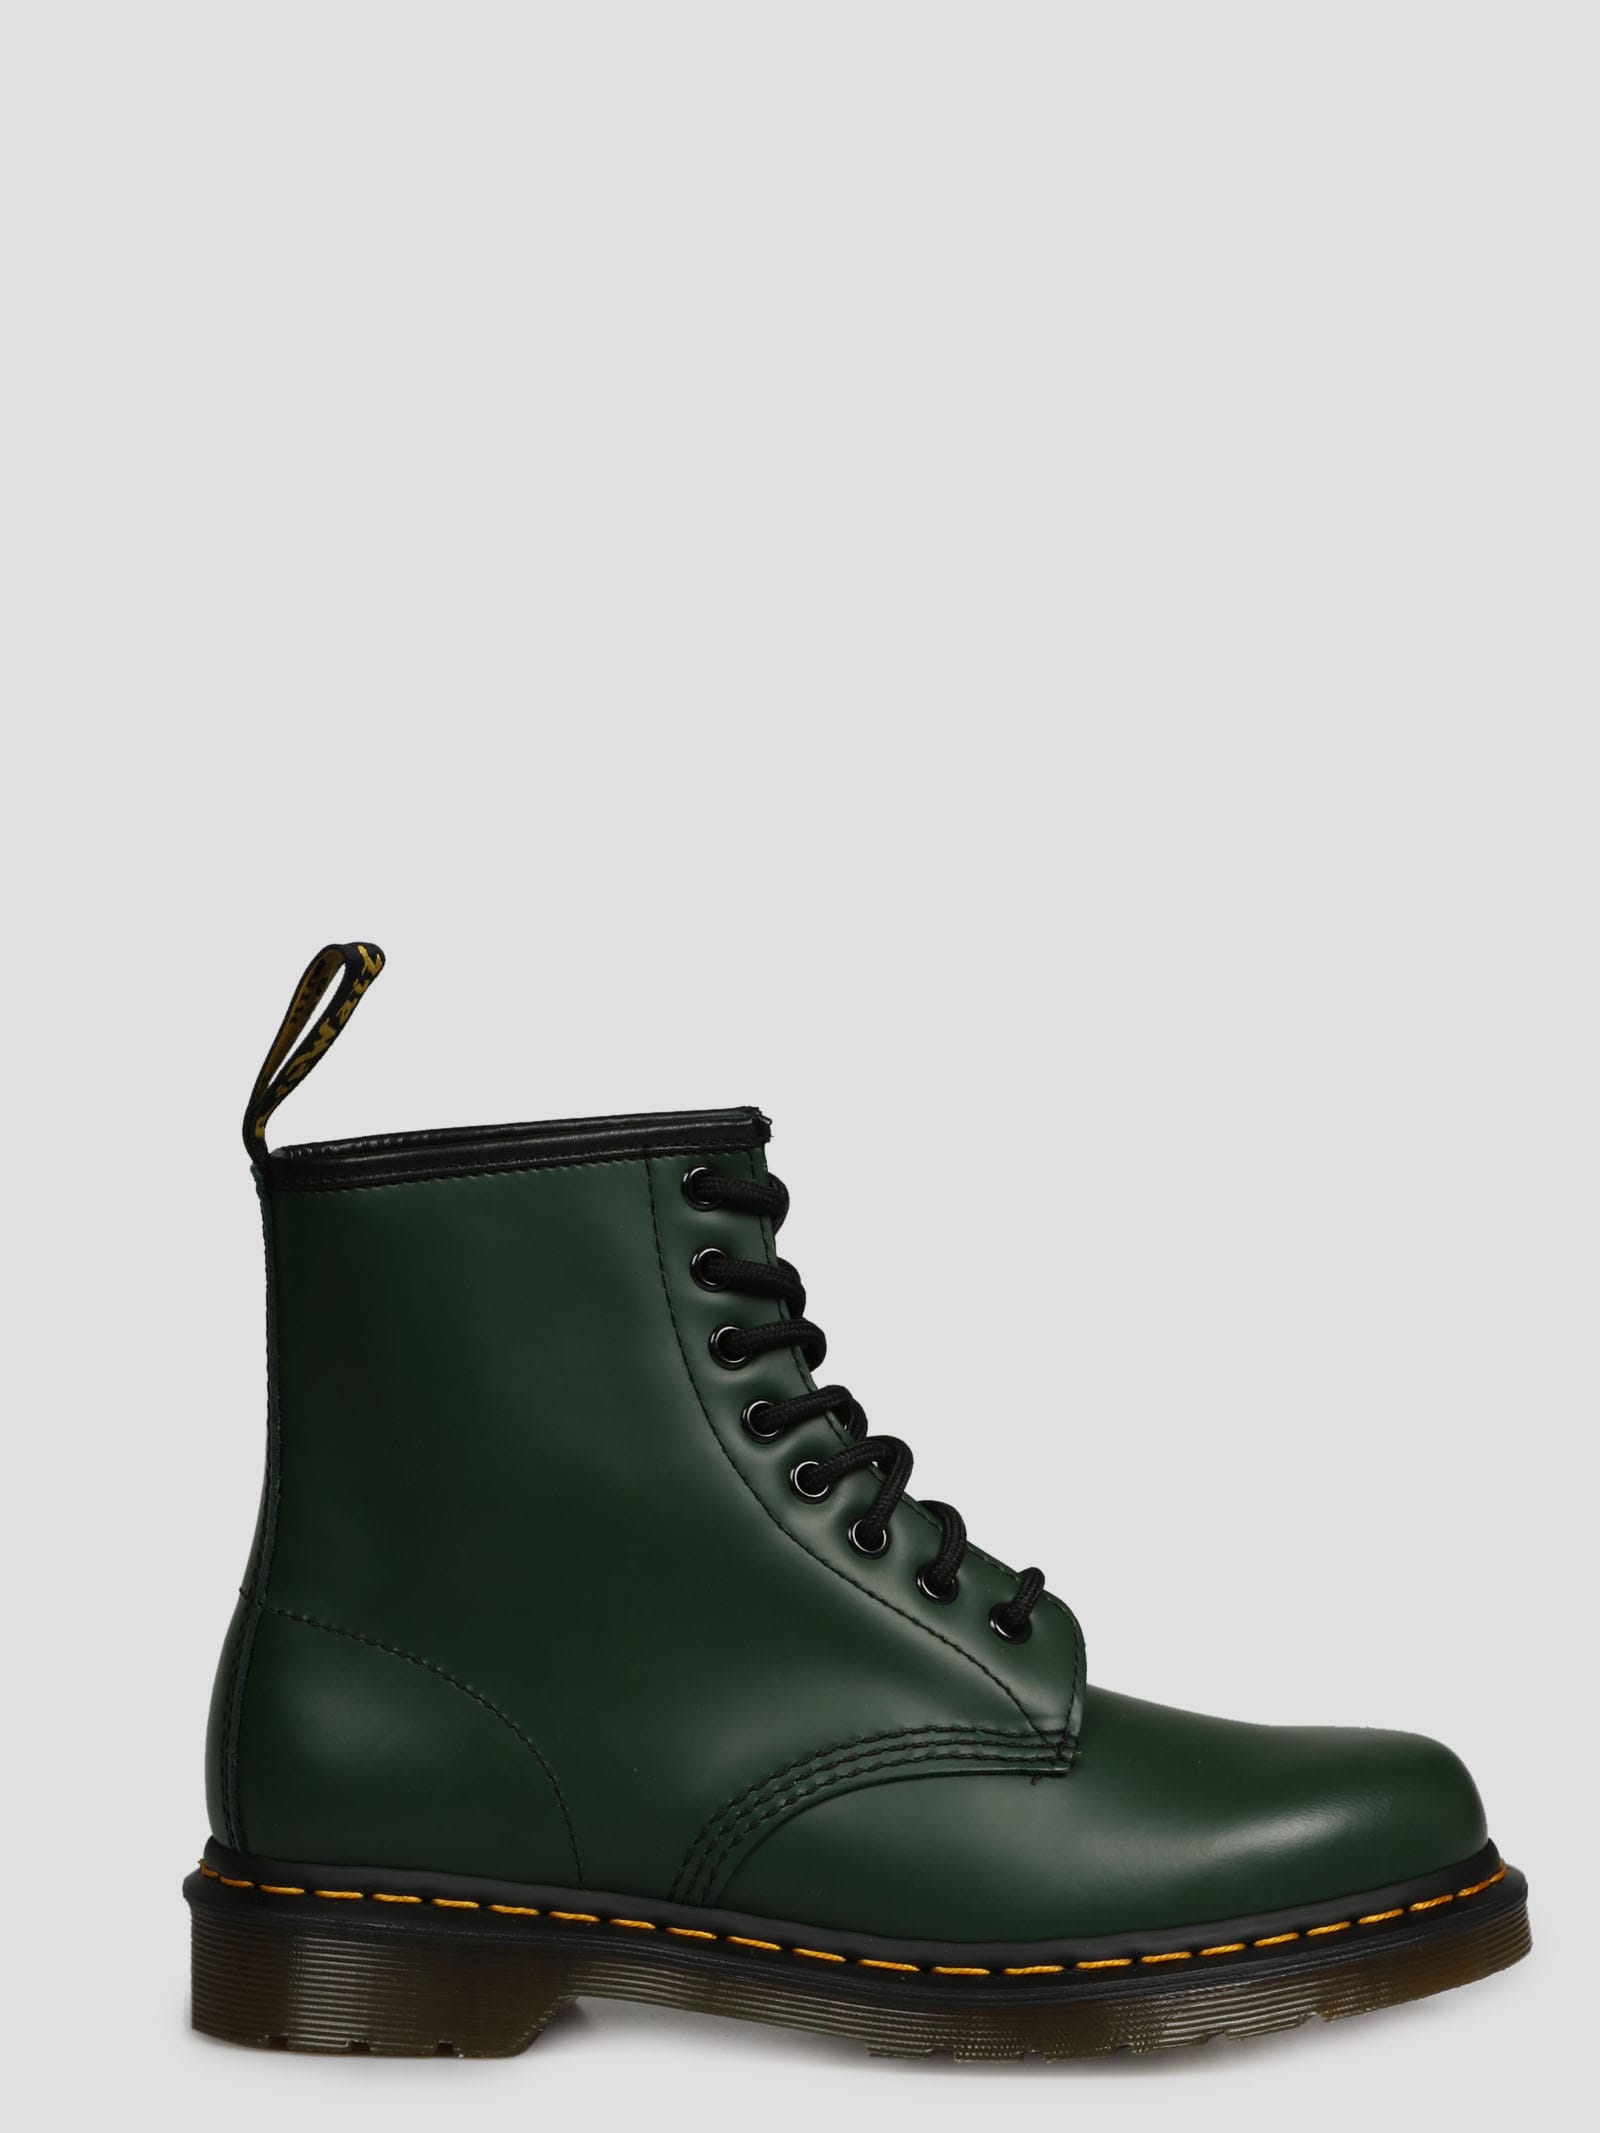 Dr. Martens 1460 Ankle Boots